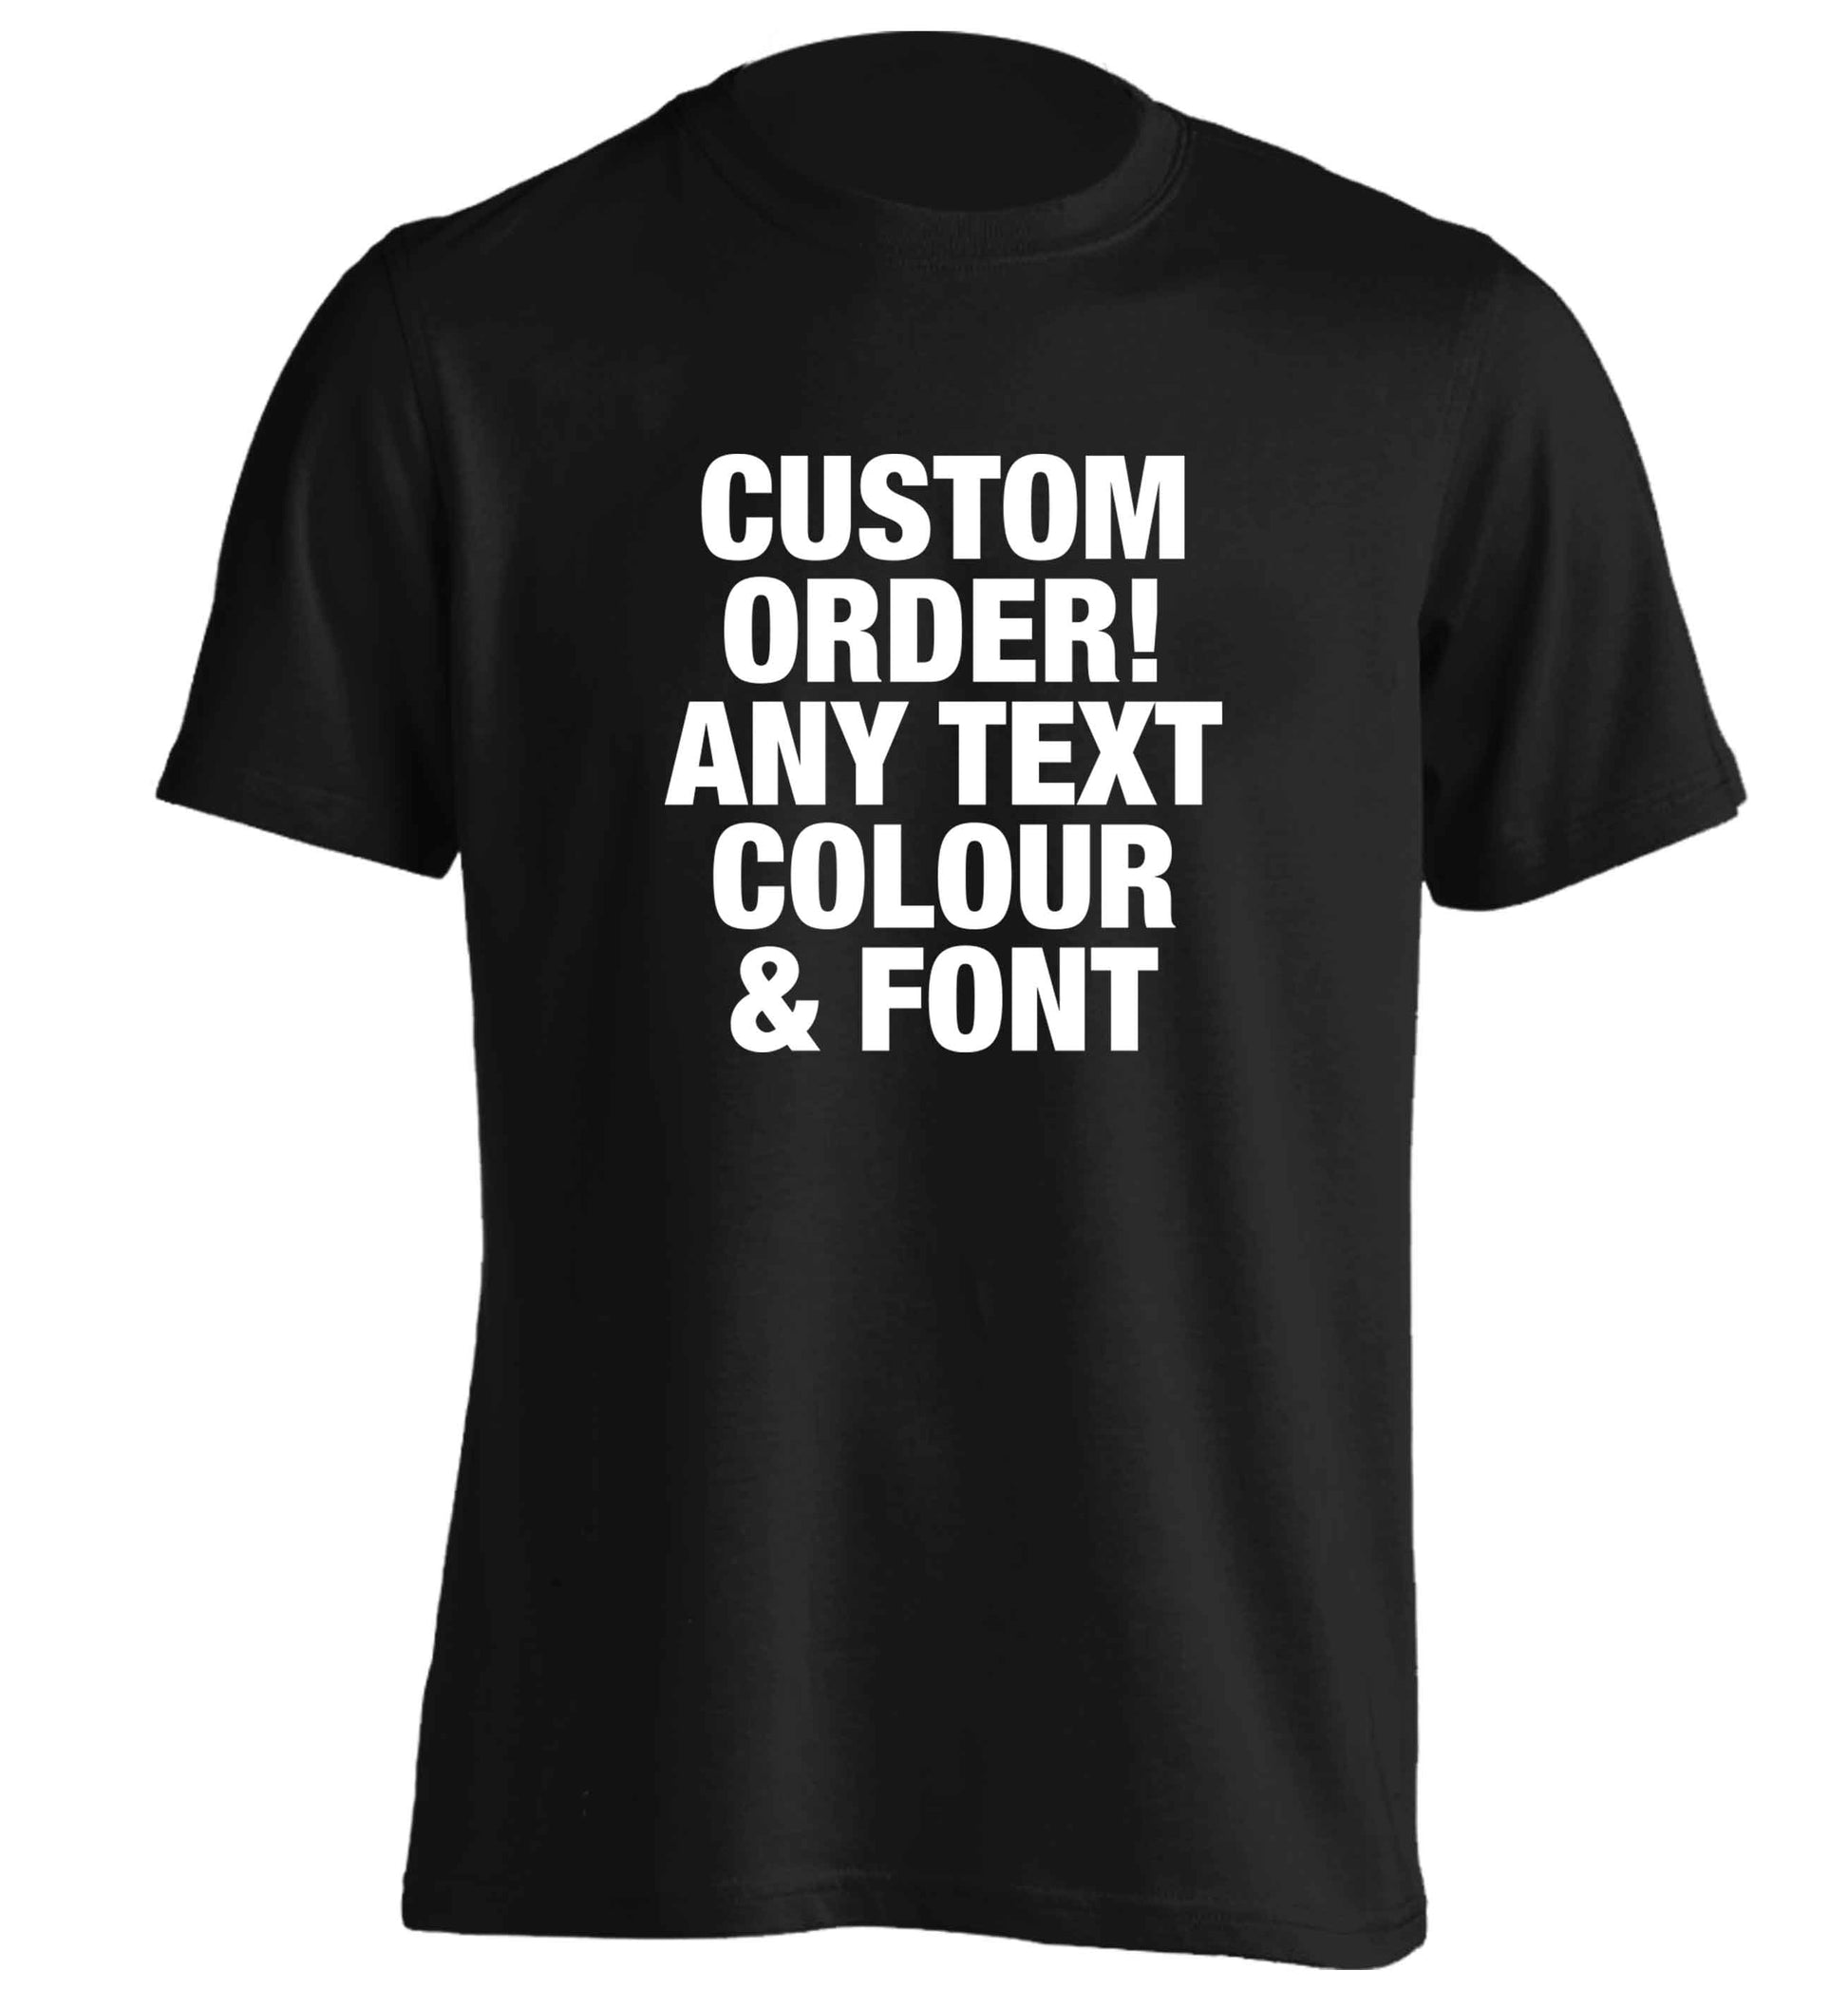 Custom order any text colour and font adults unisex black Tshirt 2XL